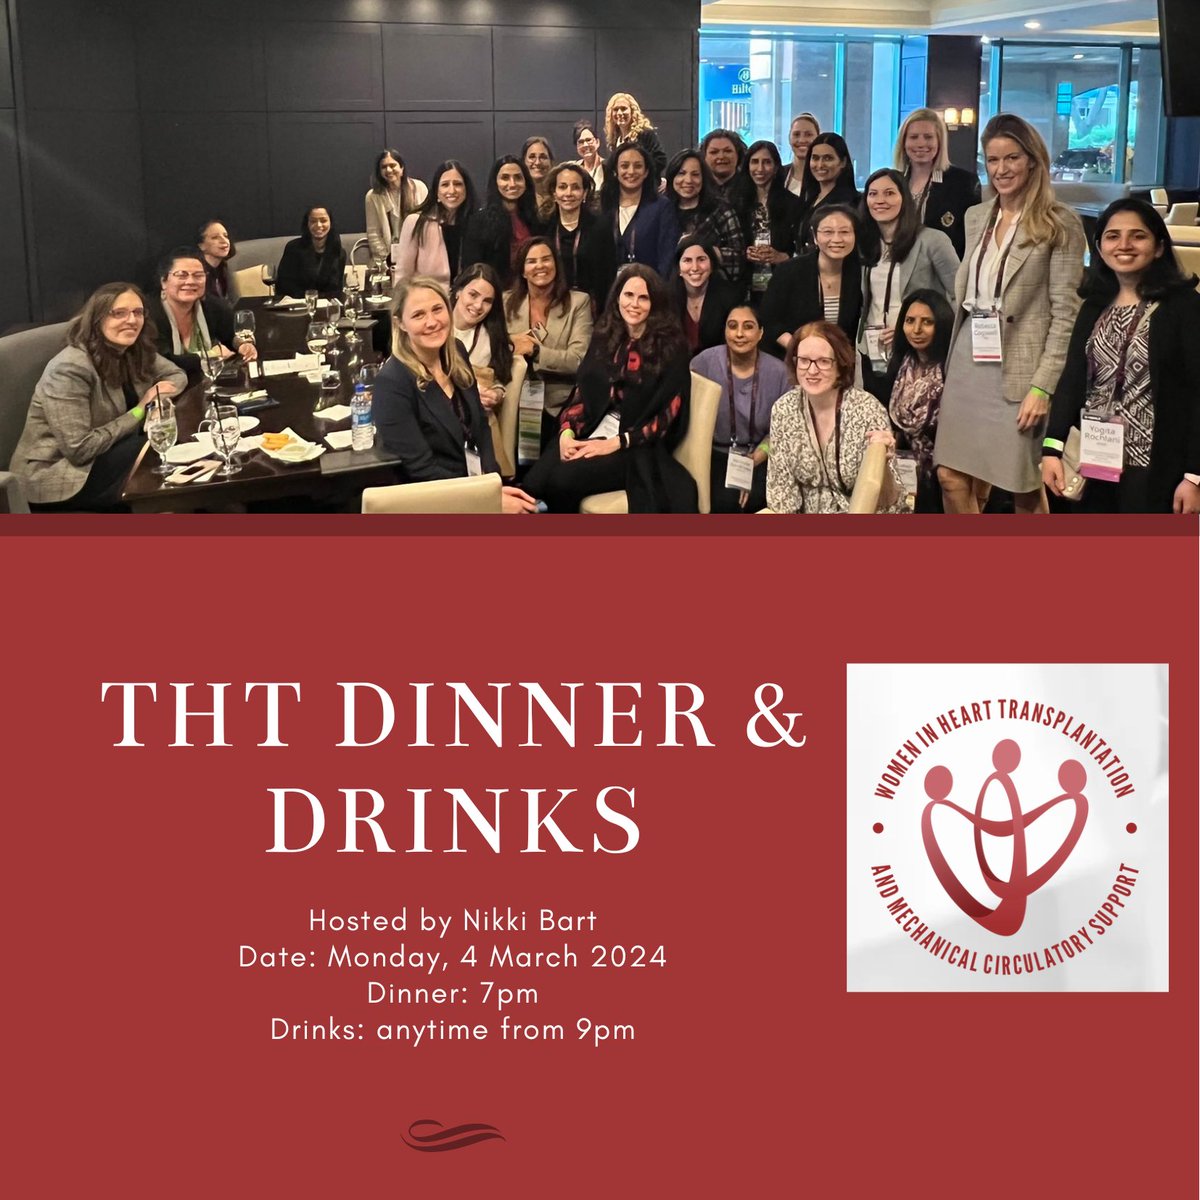 Shout out to the awesome members of @Womenintxp_mcs who are attending #THT2024!  
I'm hosting dinner and drinks. Check your email for details or contact @Womenintxp_mcs and RSVP. Looking forward to catching up with old friends and seeing some new ones.

@shelleyhallmd